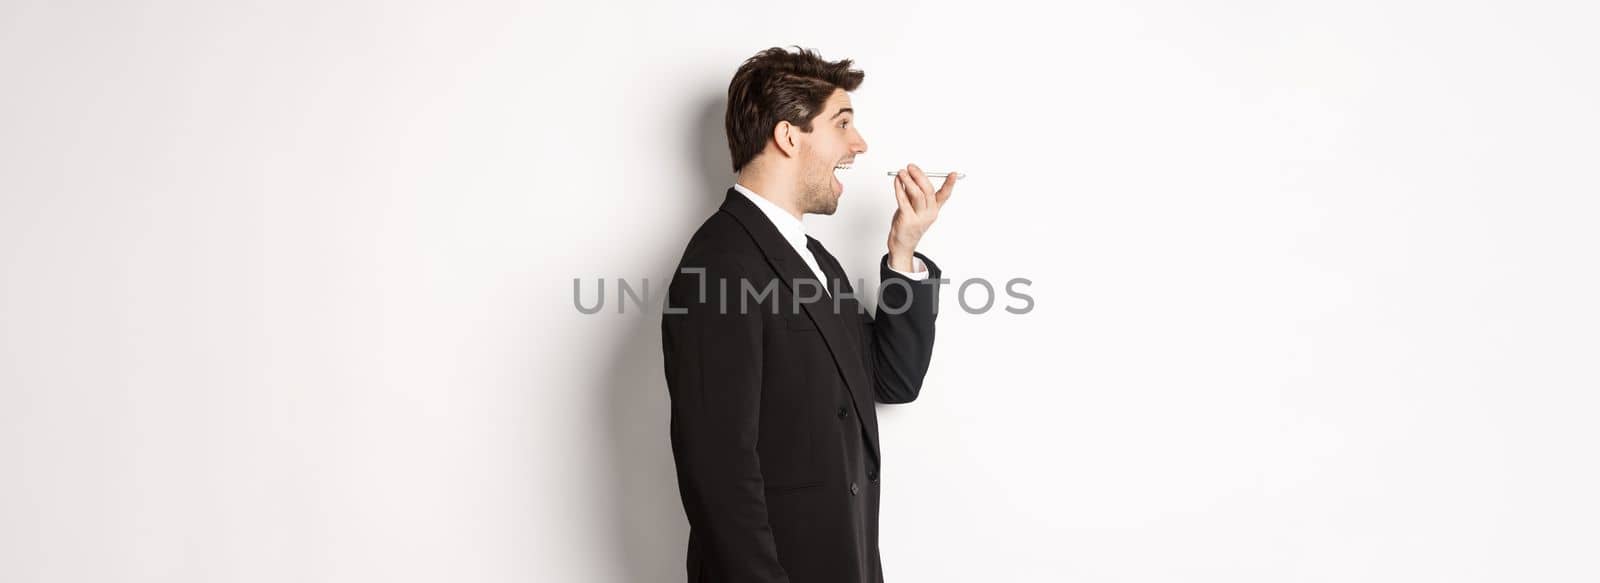 Profile shot of handsome businessman in black suit talking on speakerphone, smiling and looking happy, recording voice message, standing over white background.